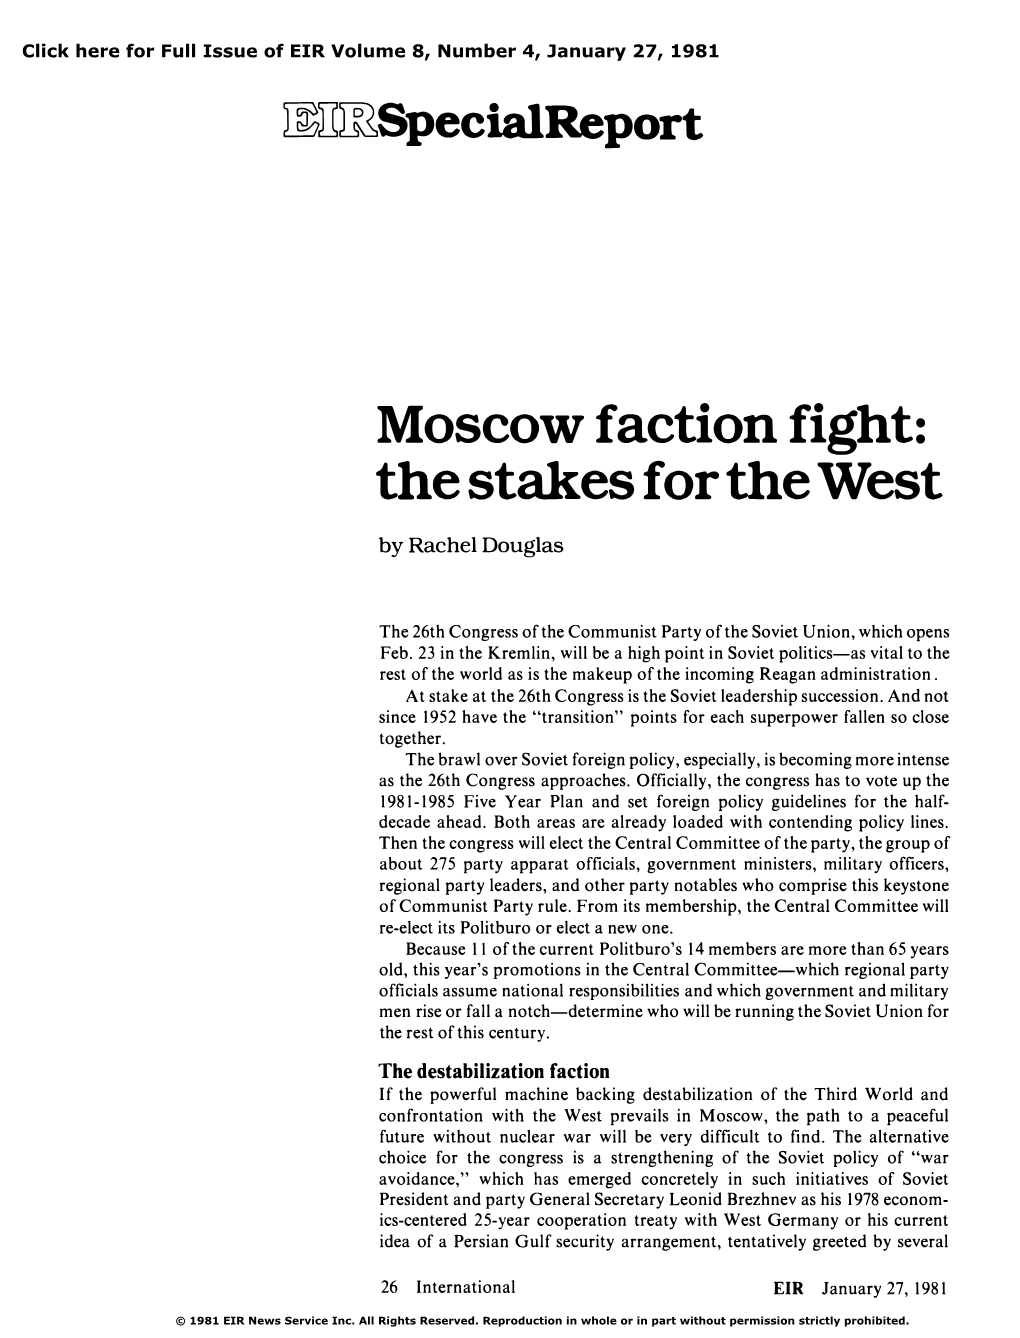 Moscow Faction Fight: the Stakes for the West